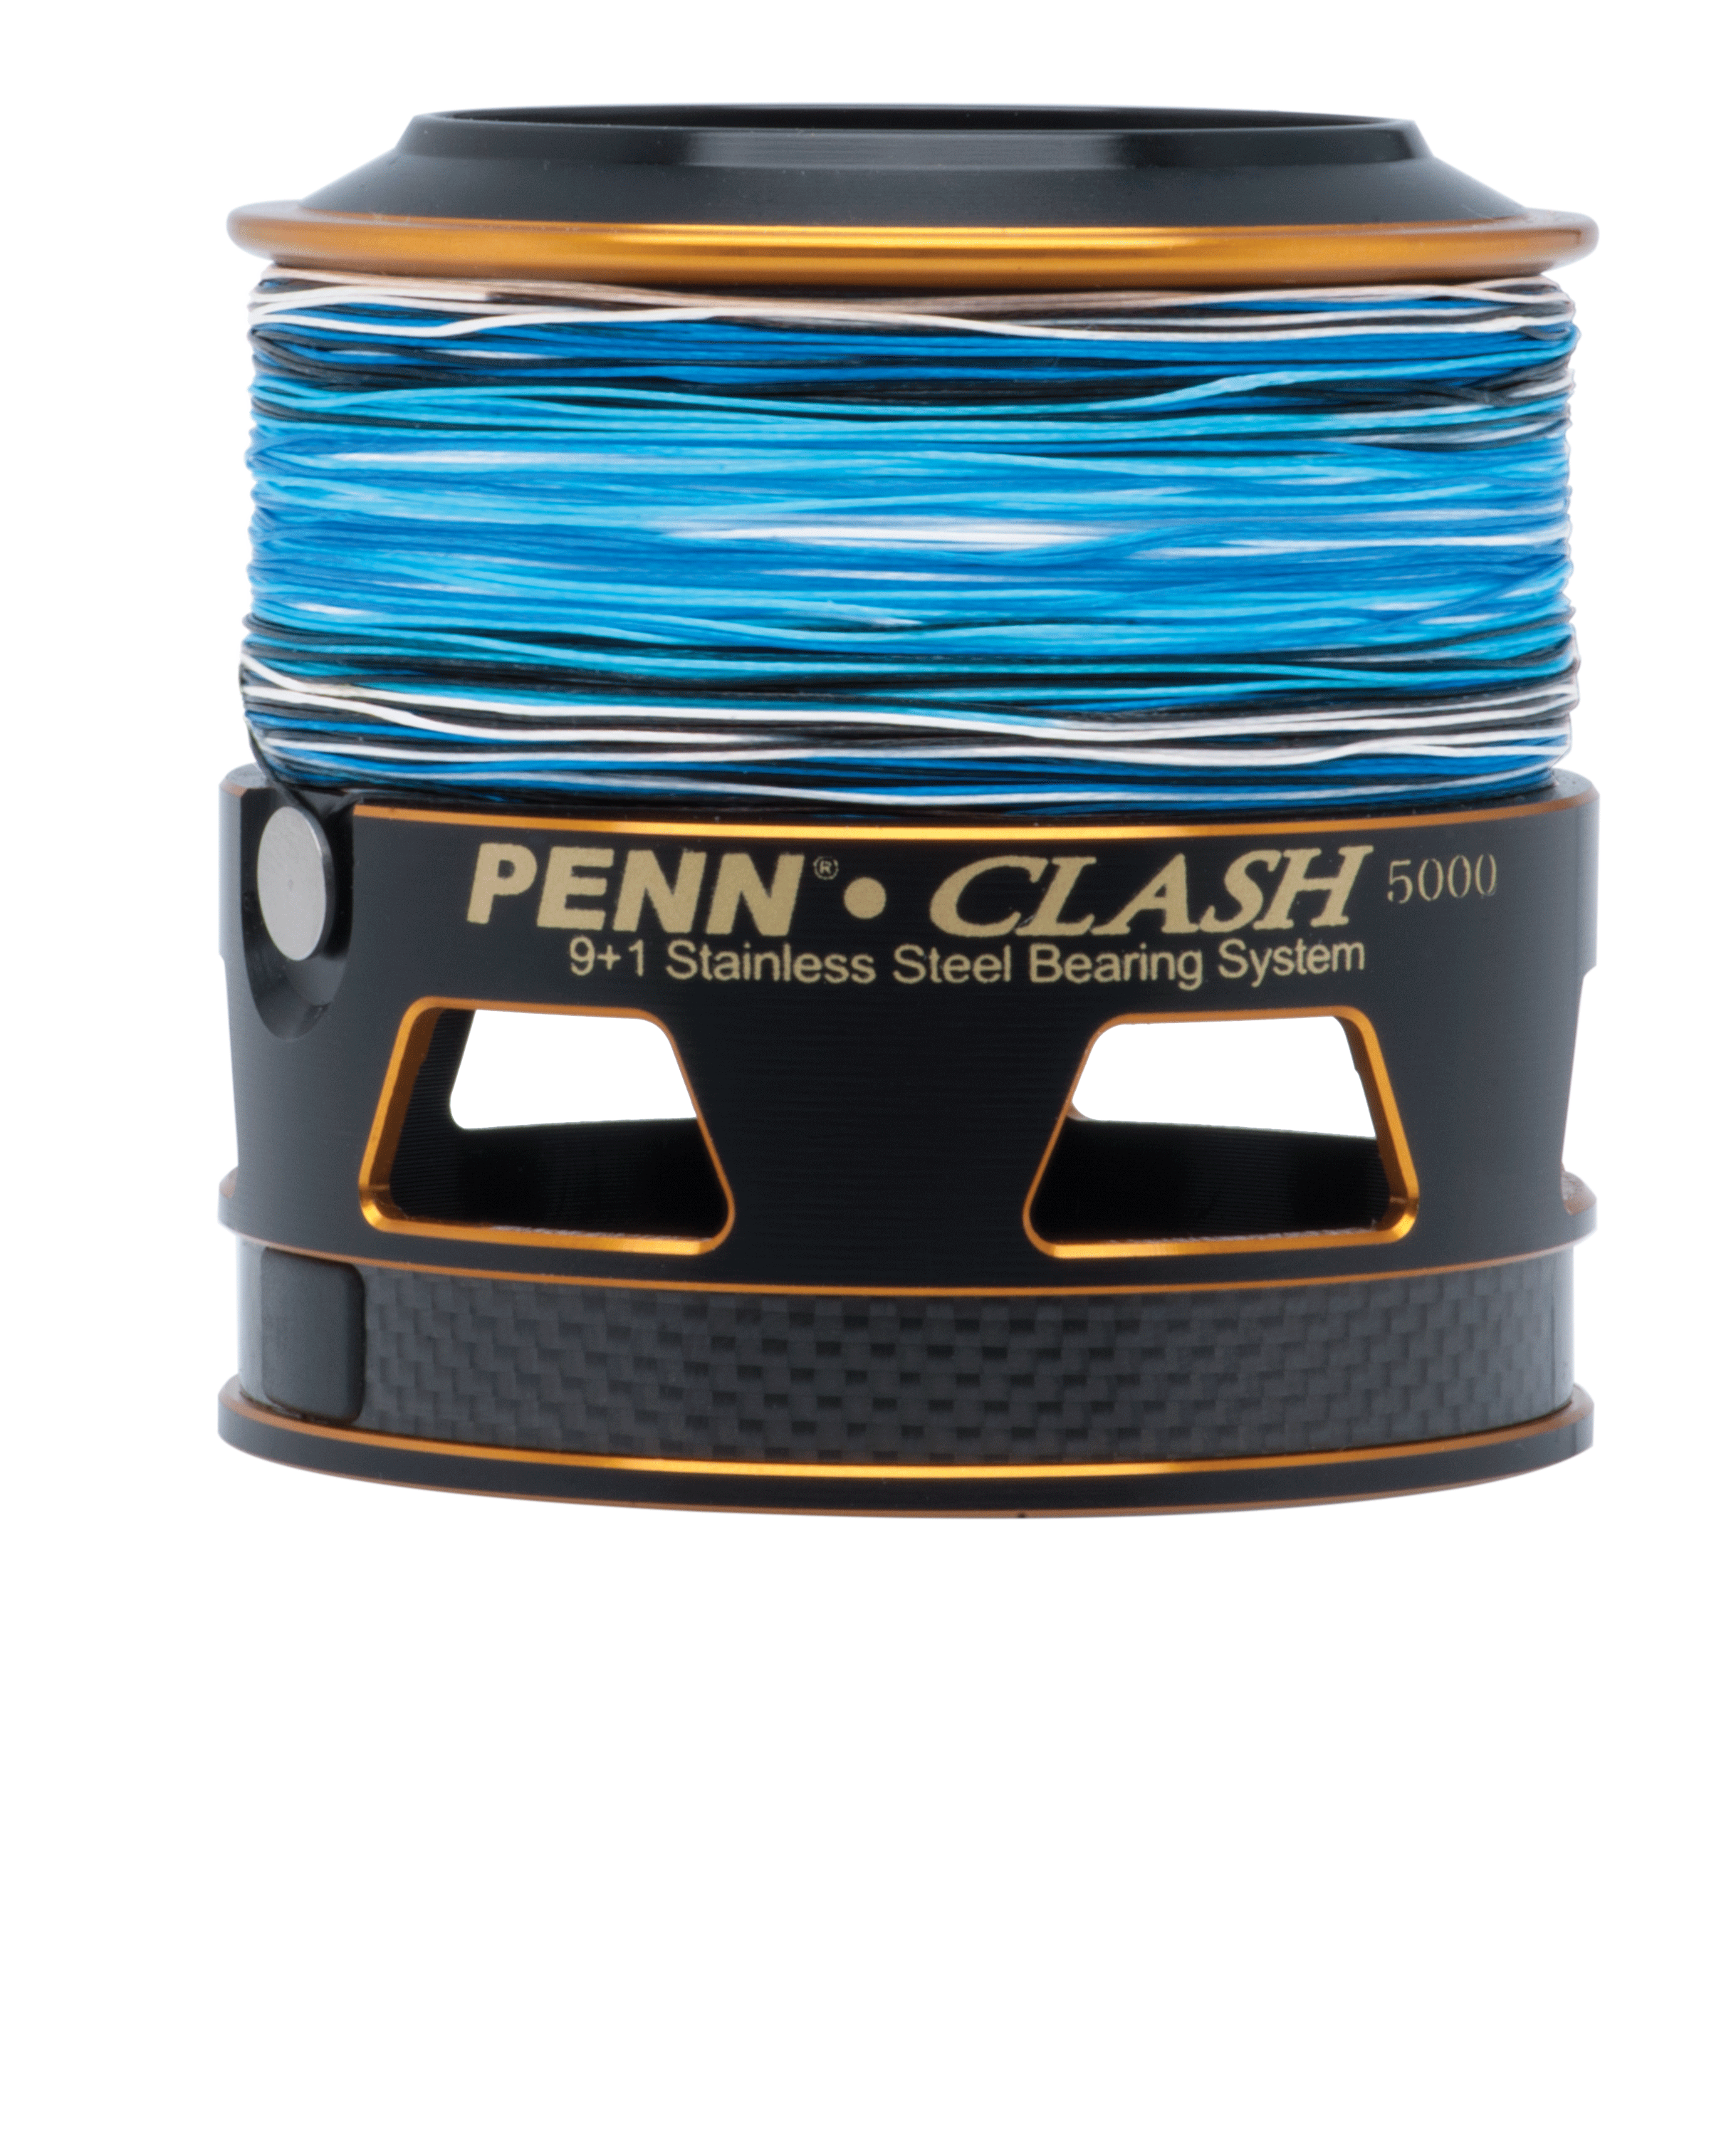 Product Review-PENN Clash Spinning Reel - Wrightsville Beach Fishing Report  with Capt. Jot Owens